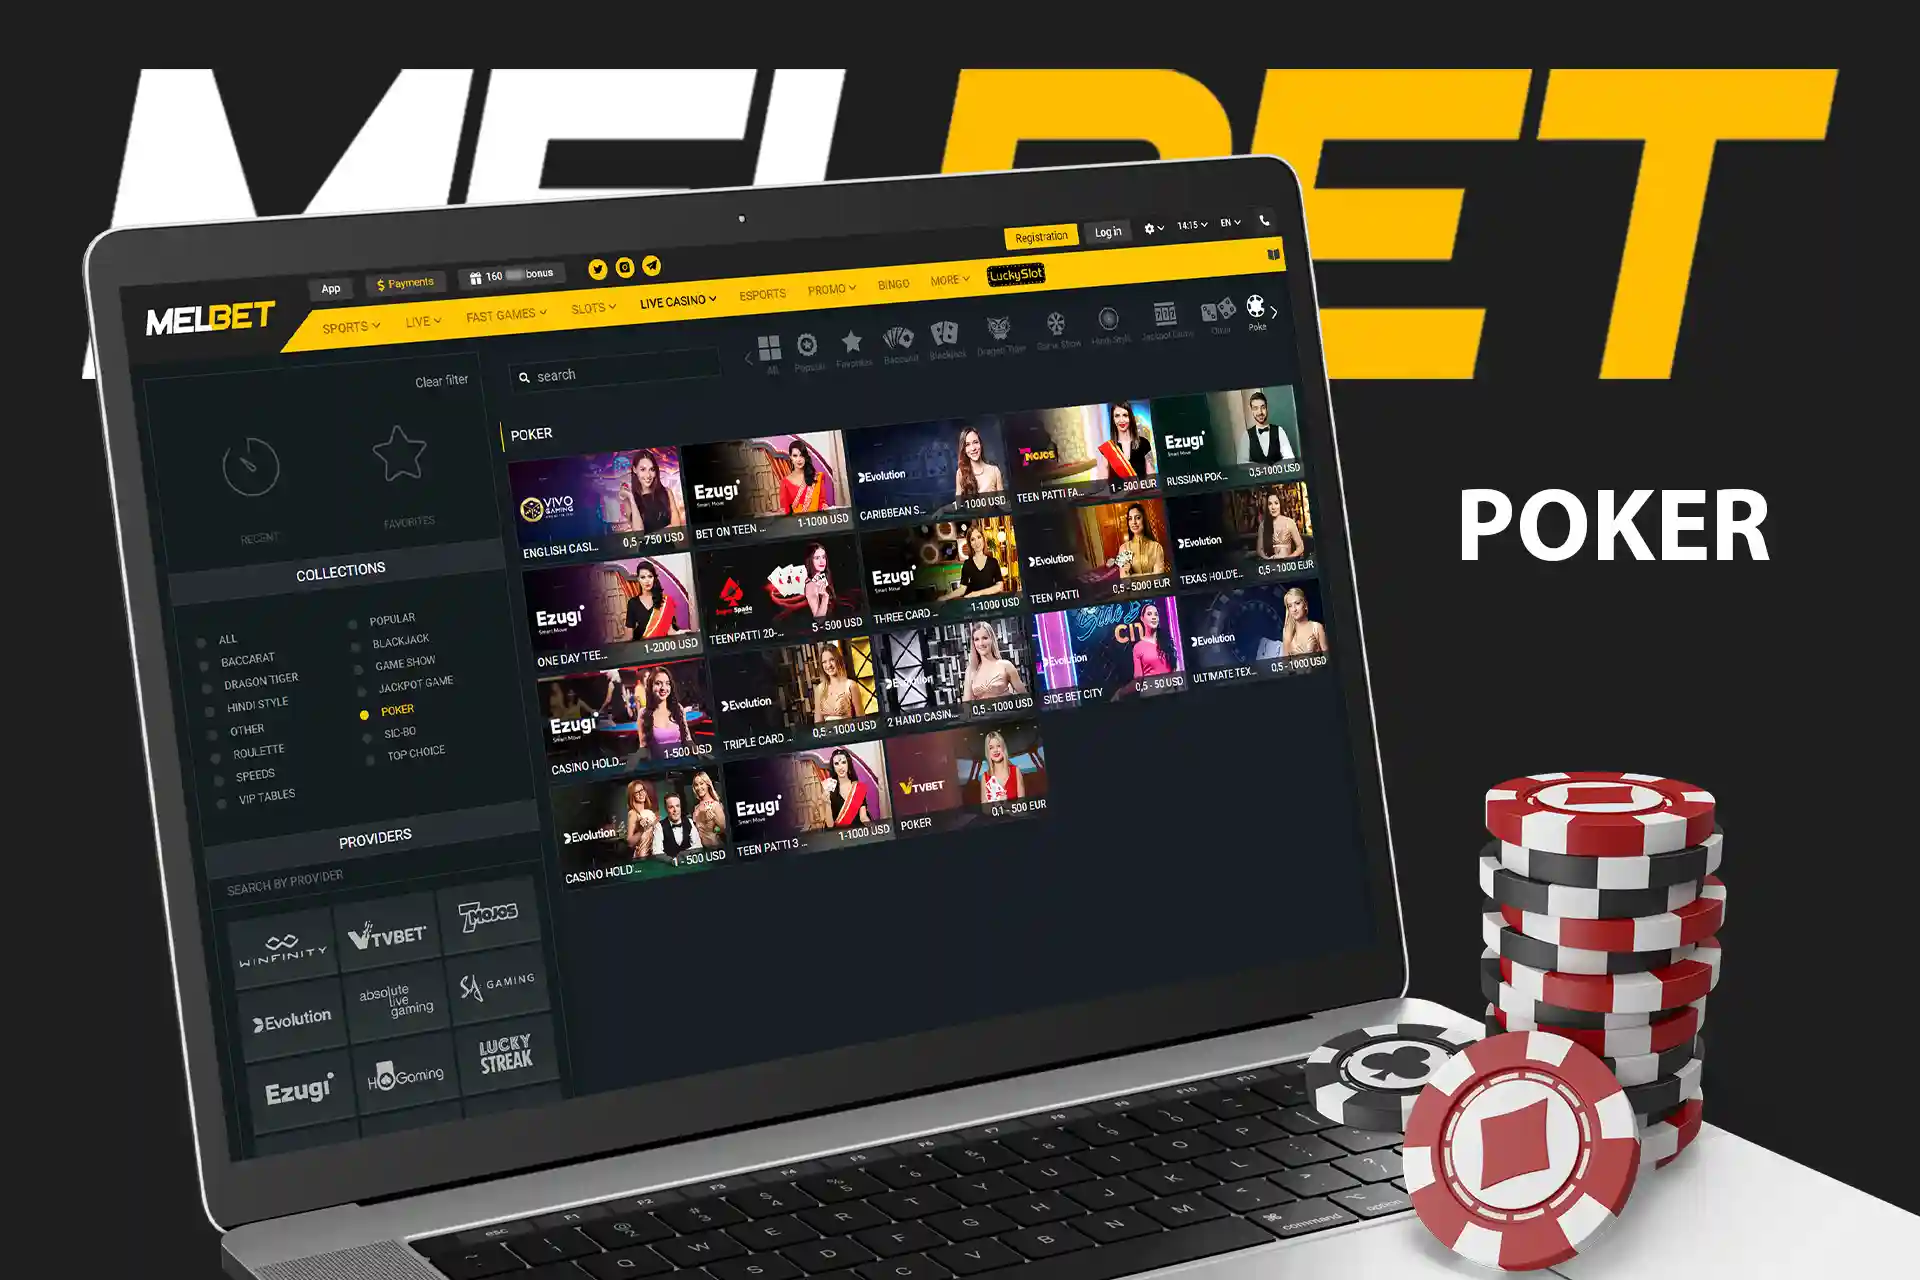 Play poker with Melbet and hone your skills.